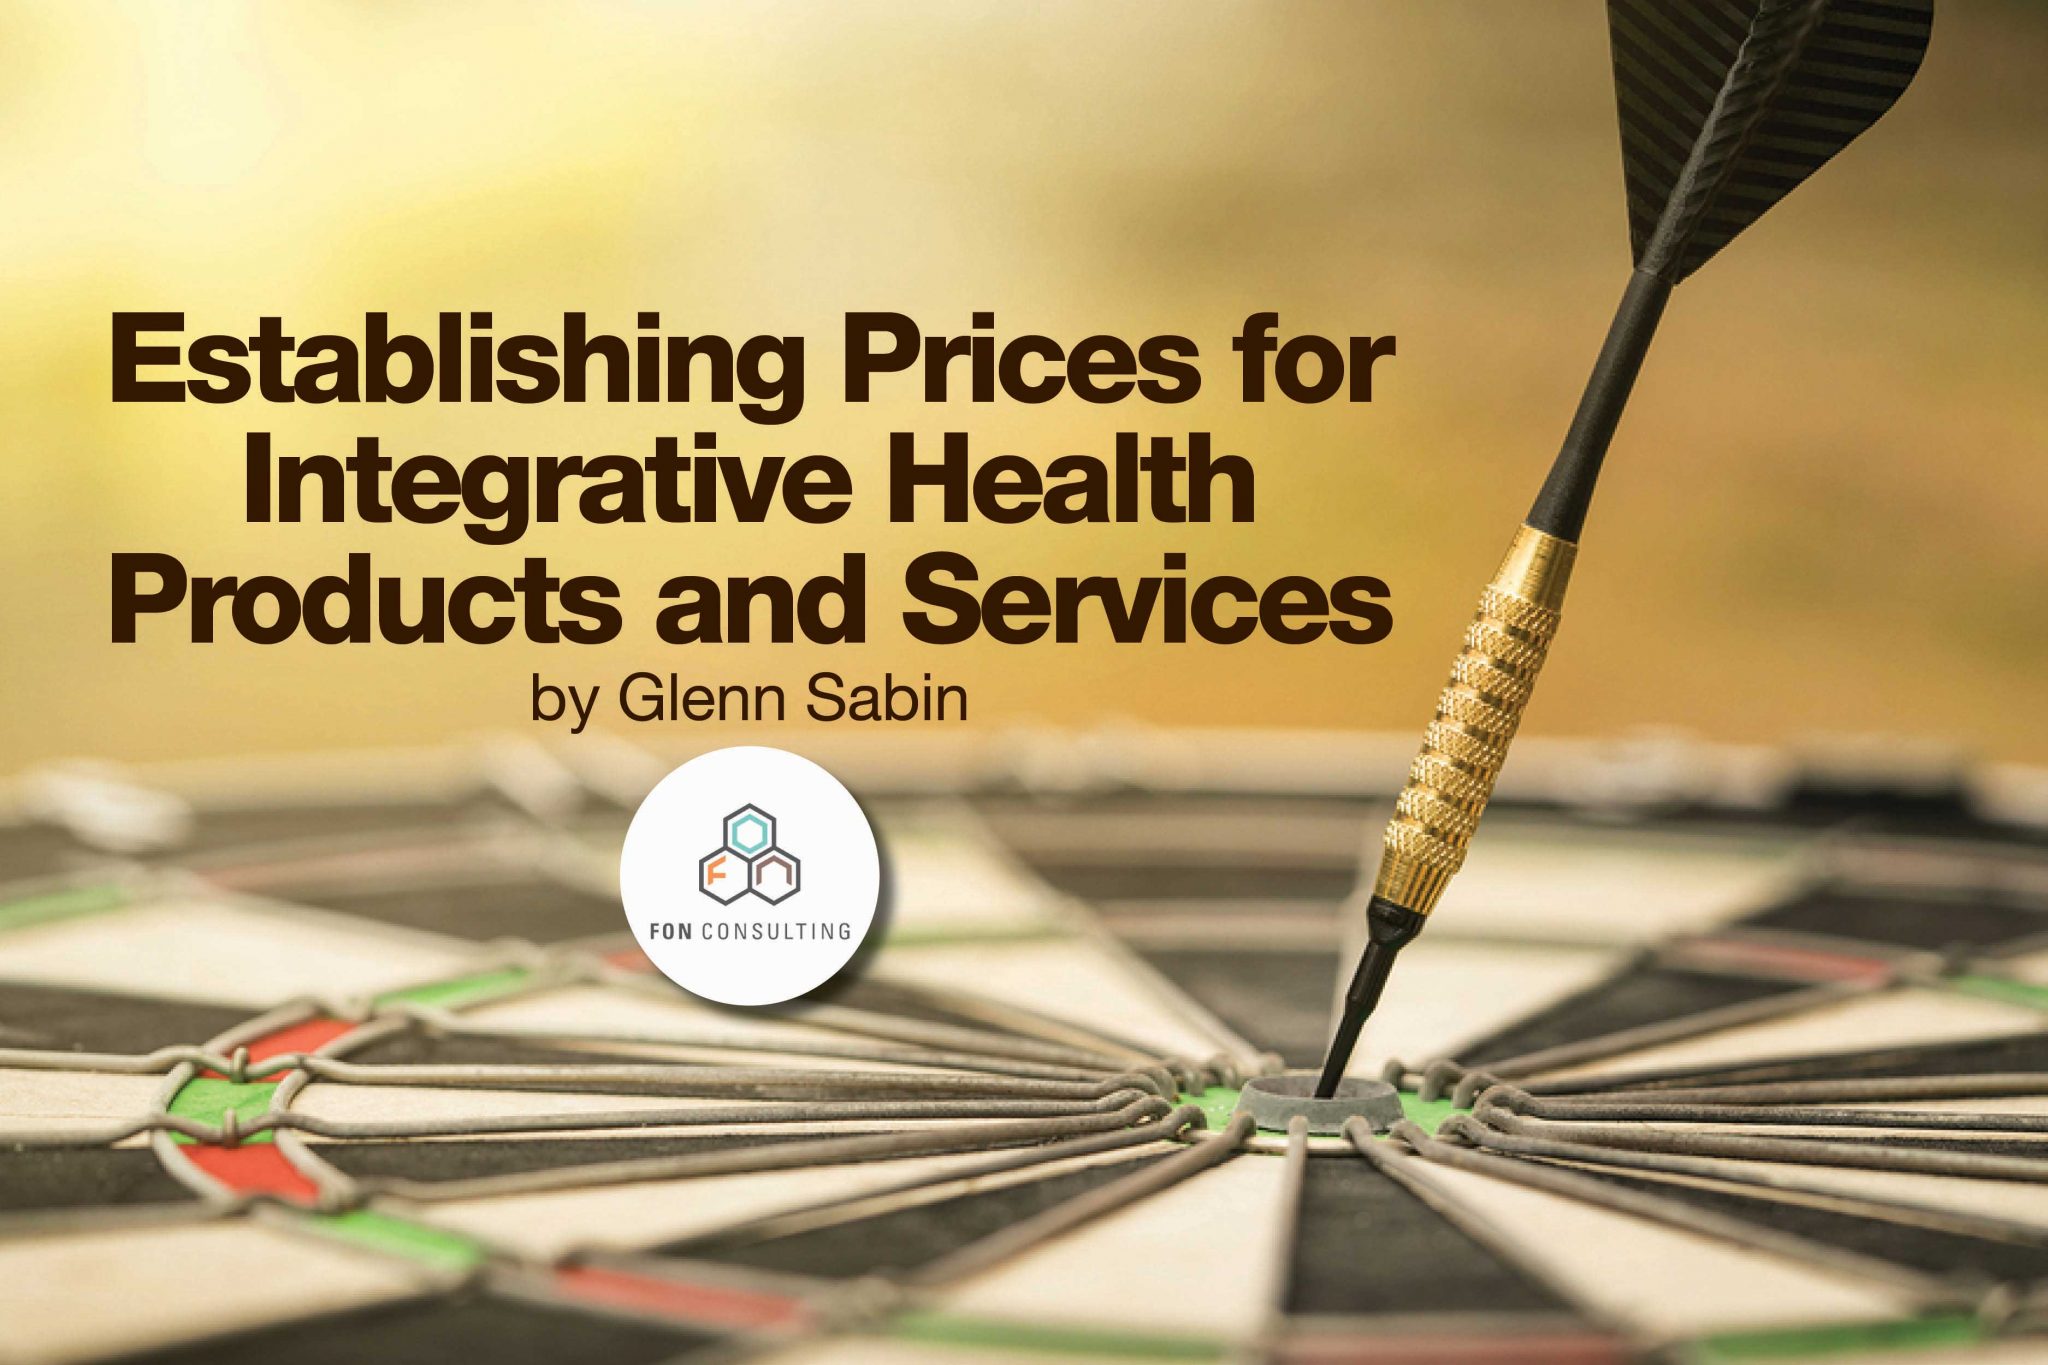 Prices for Integrative Health